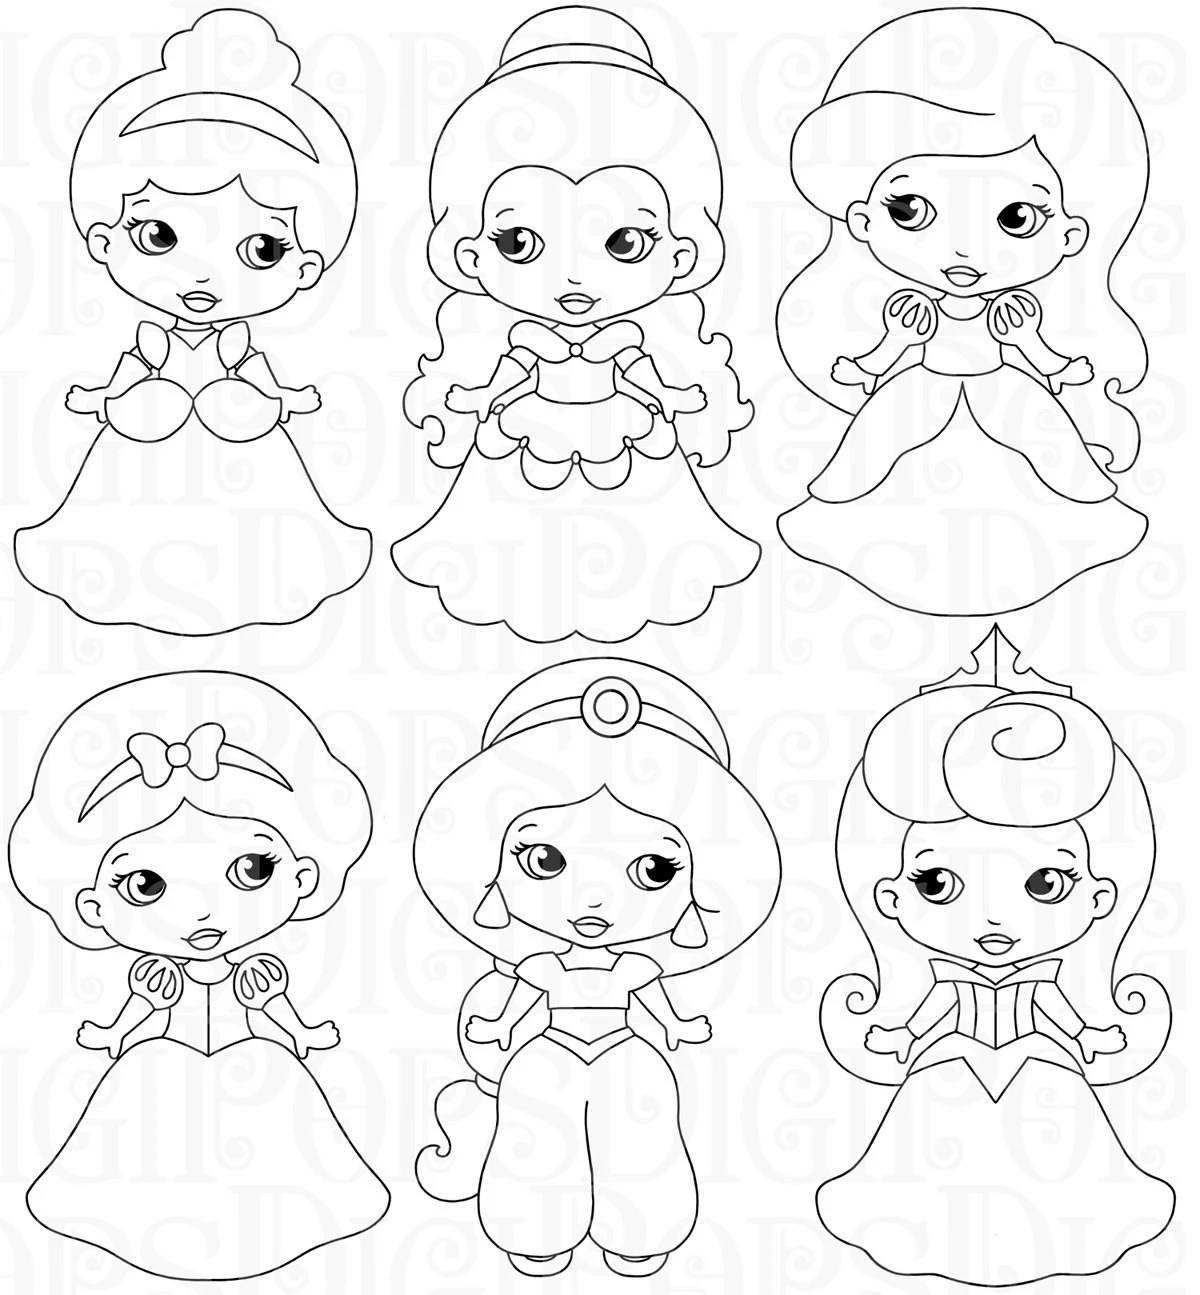 Exquisite princess doll coloring game